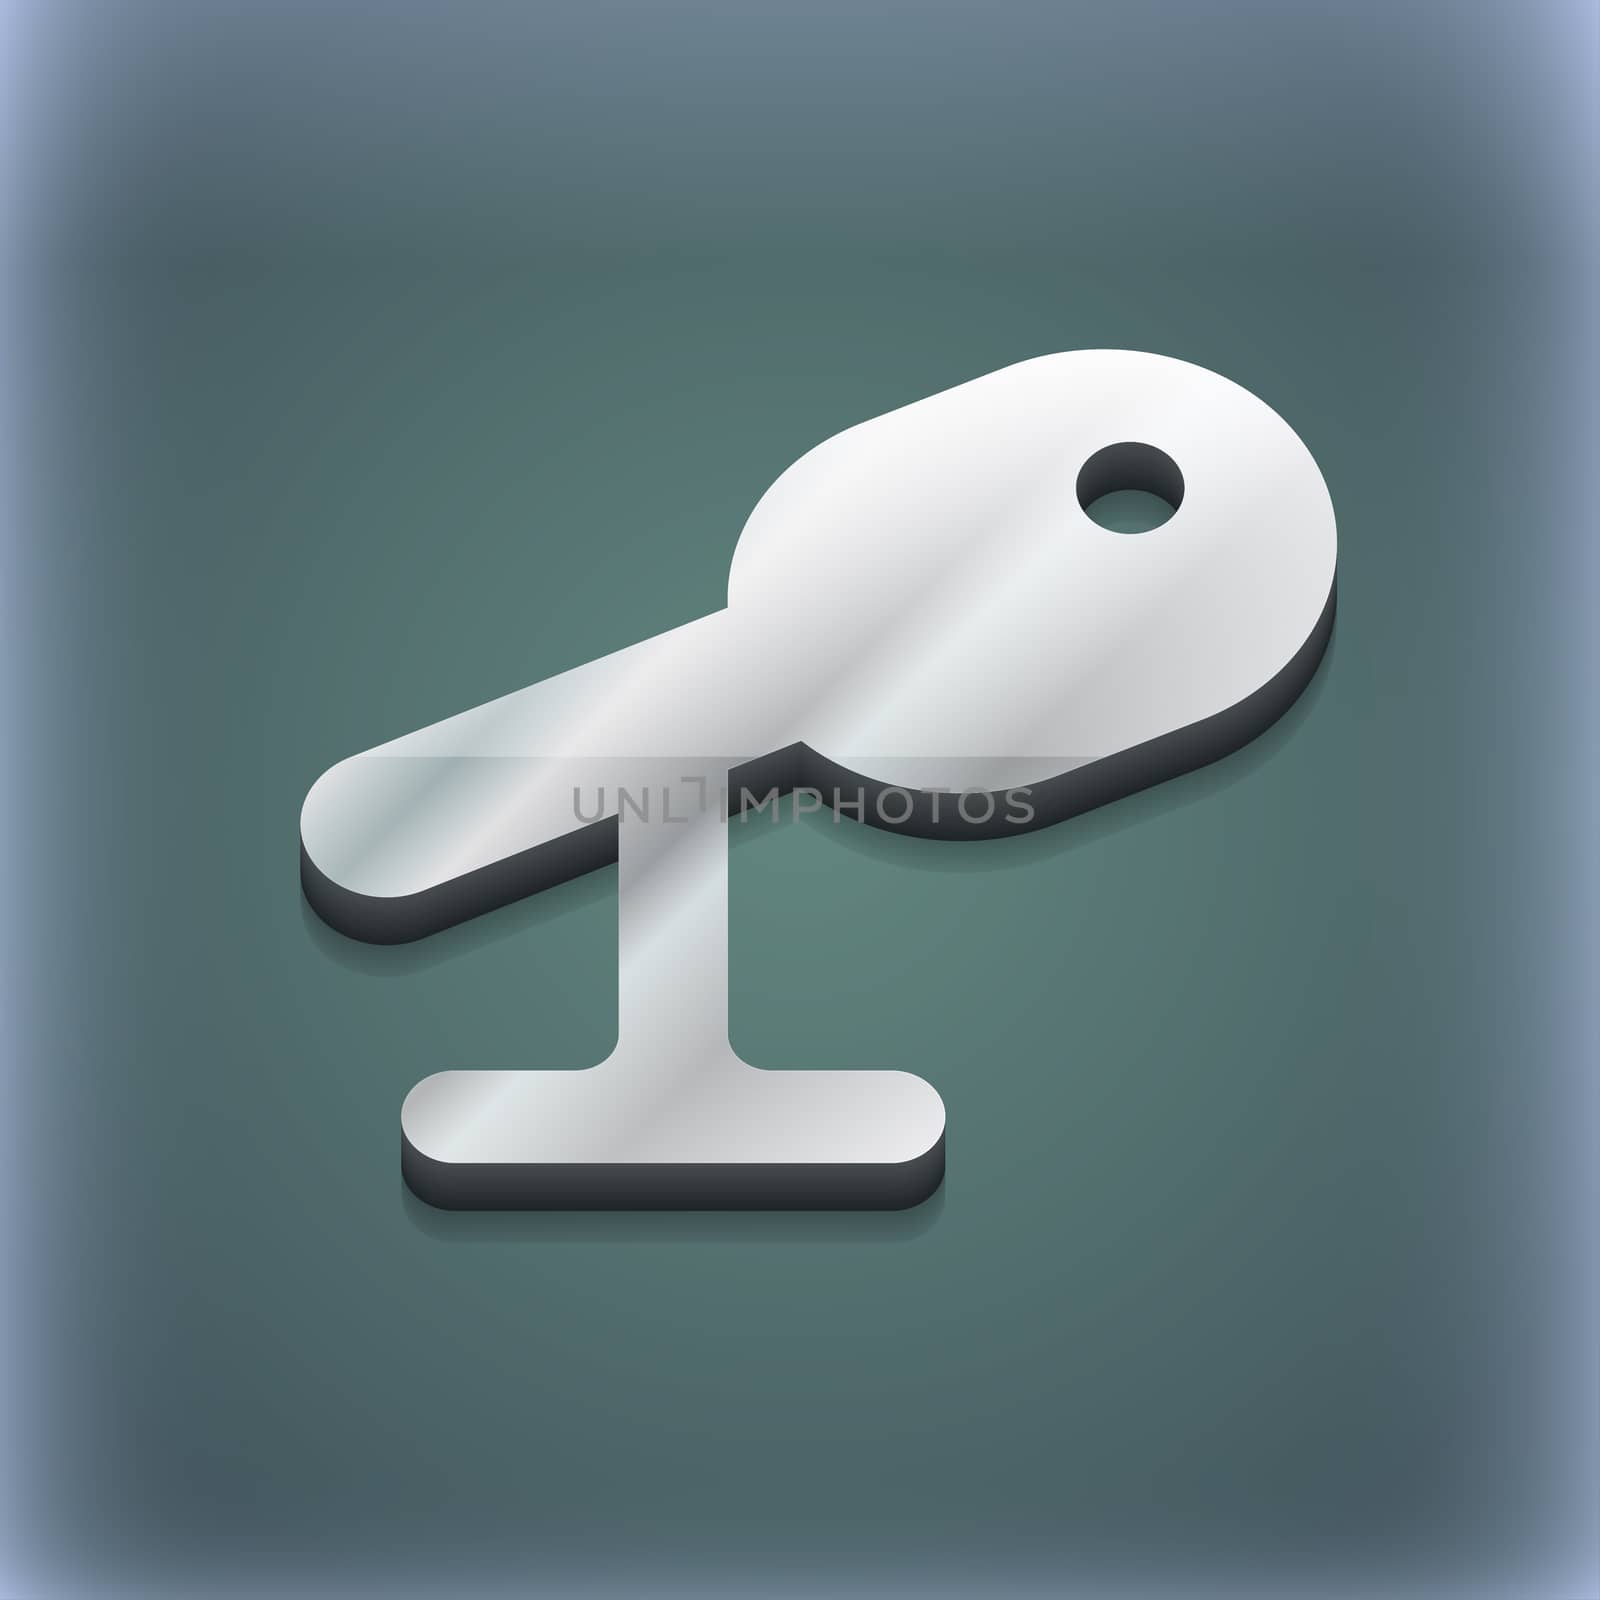 Microphone, Speaker icon symbol. 3D style. Trendy, modern design with space for your text illustration. Raster version